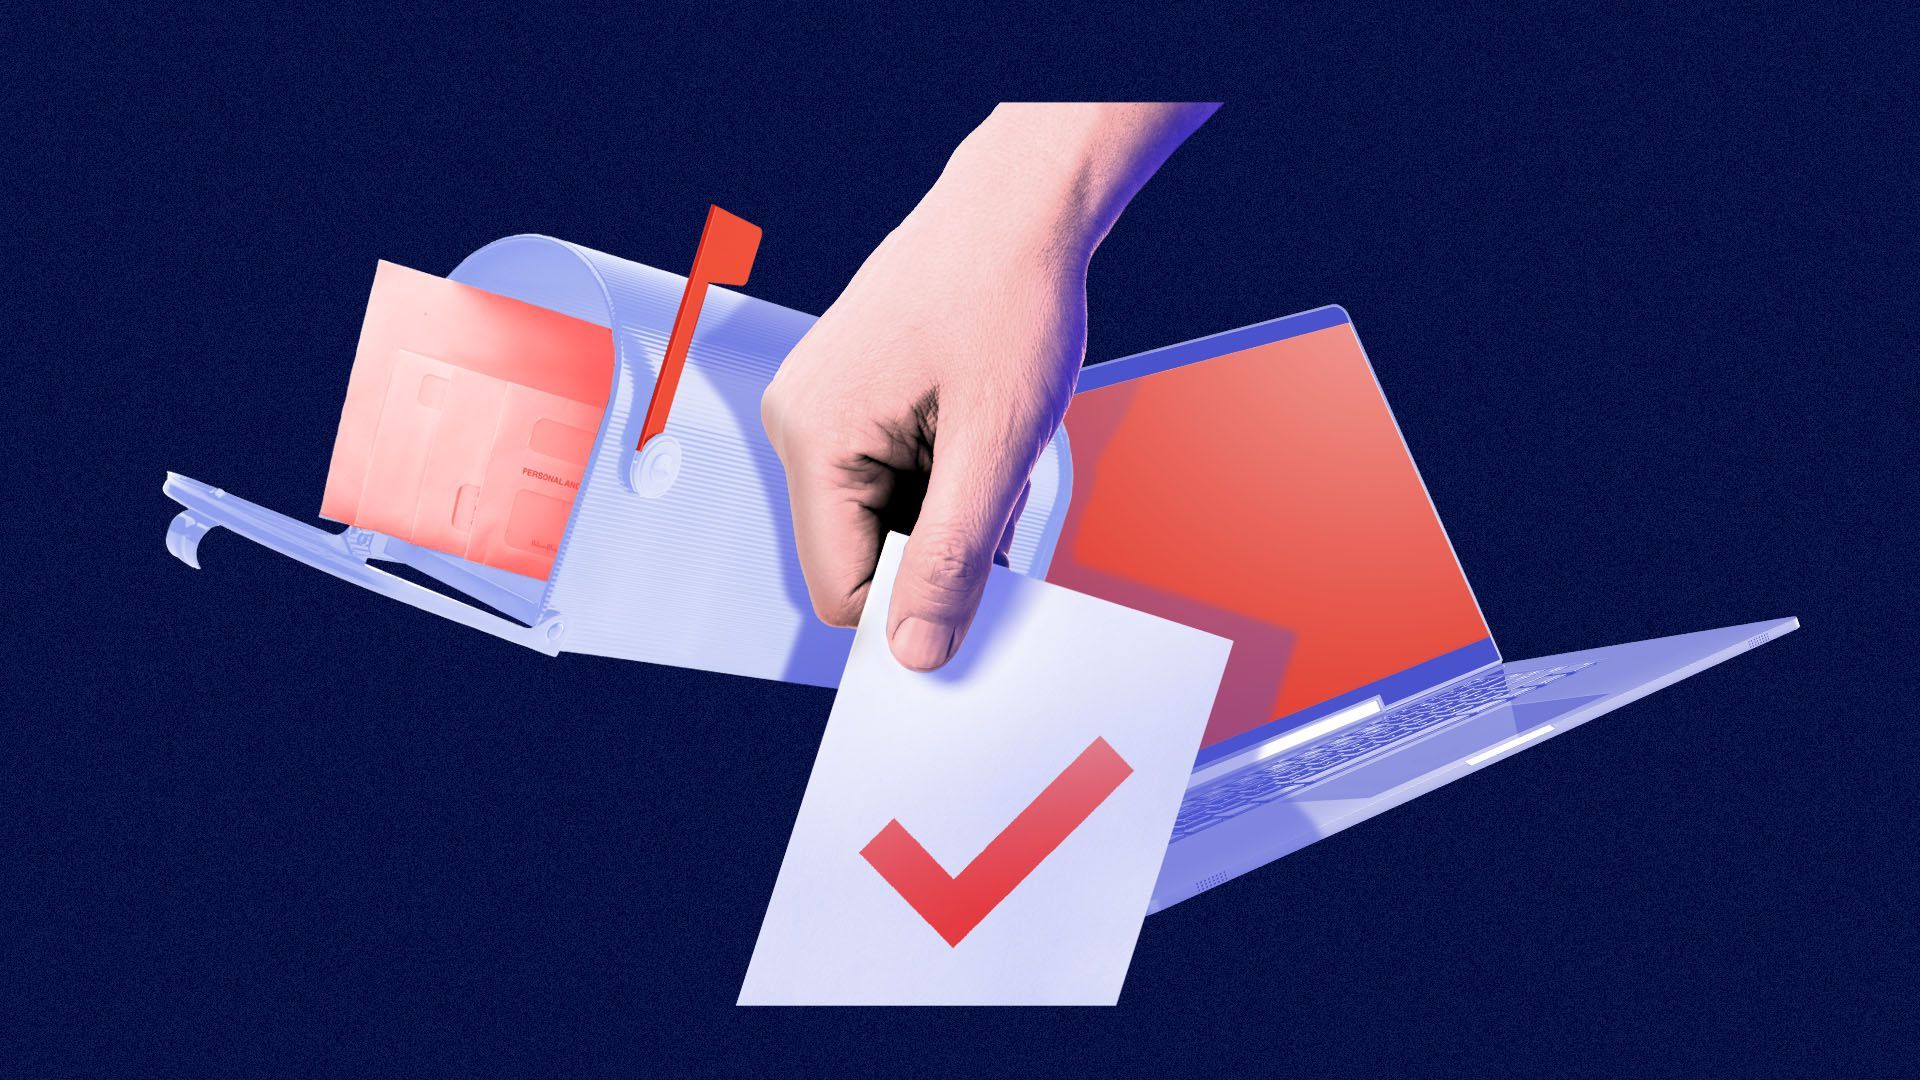 Illustrated collage of a hand casting a ballot with a mailbox and laptop in the background